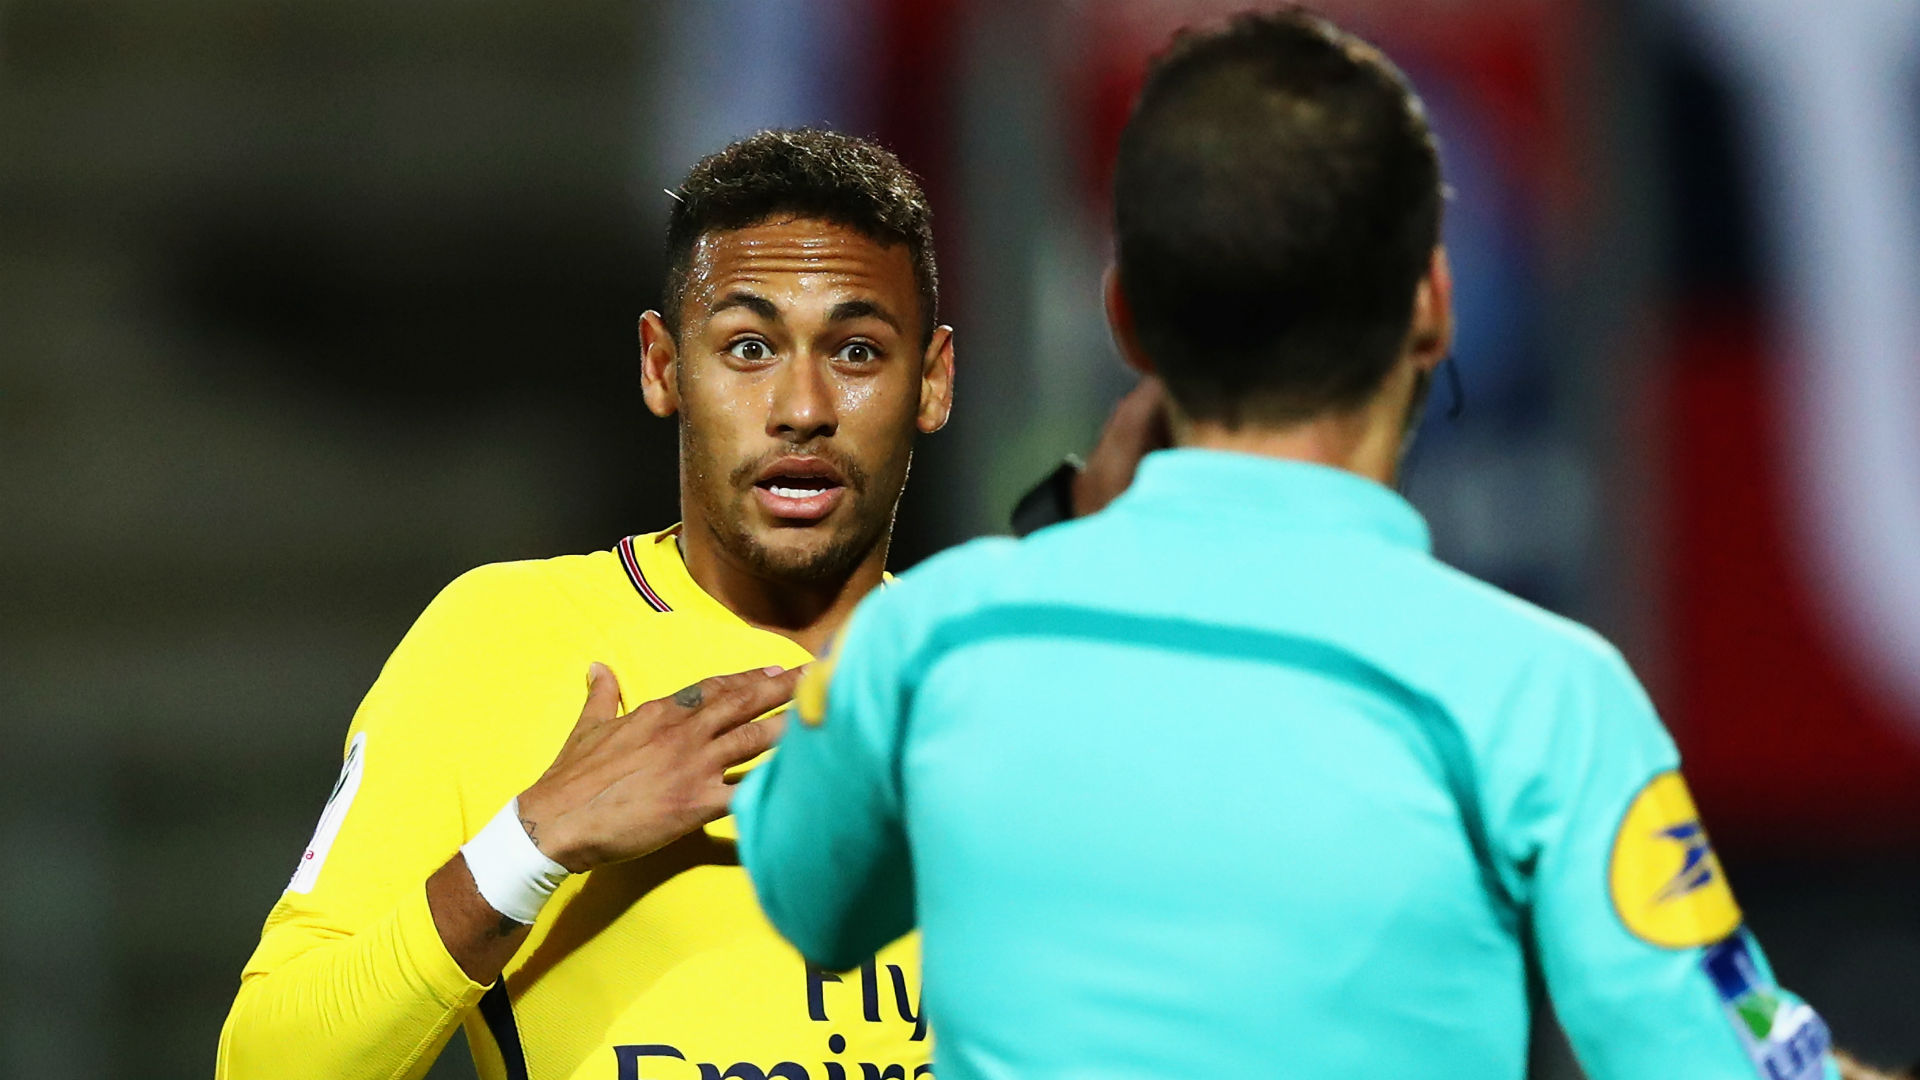 Neymar no longer playing with the best at PSG, claims Wenger